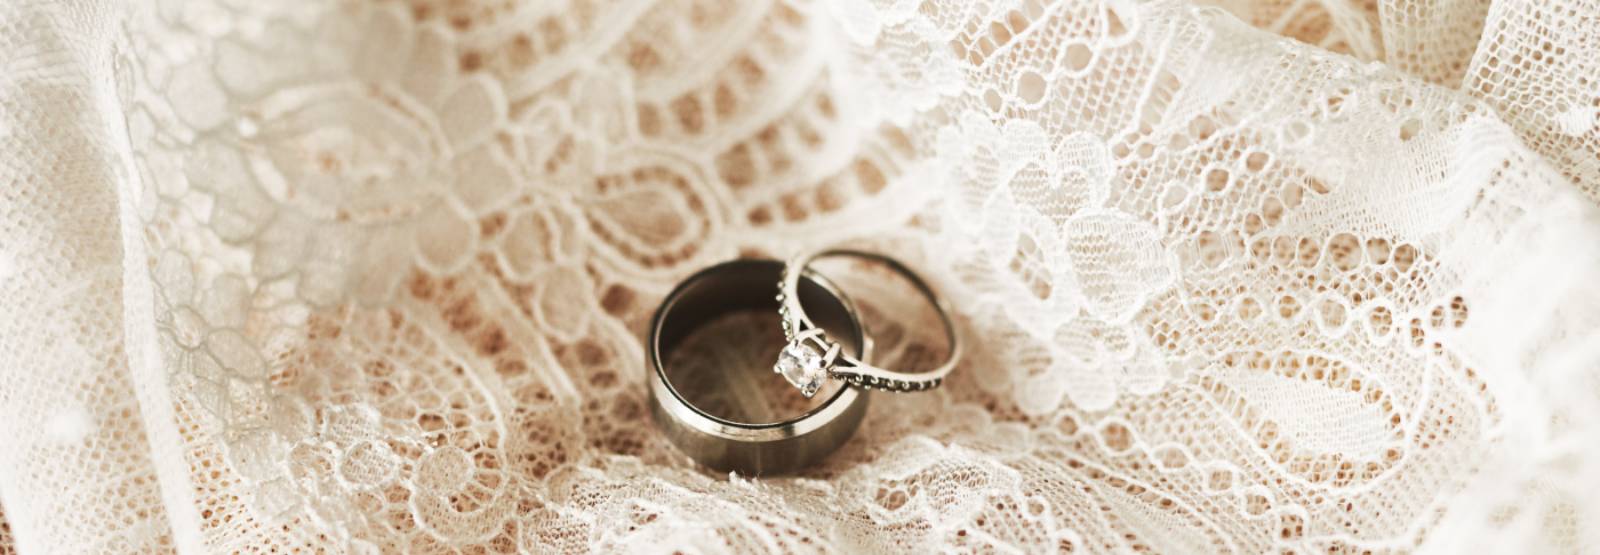 wedding bands on a white lace material